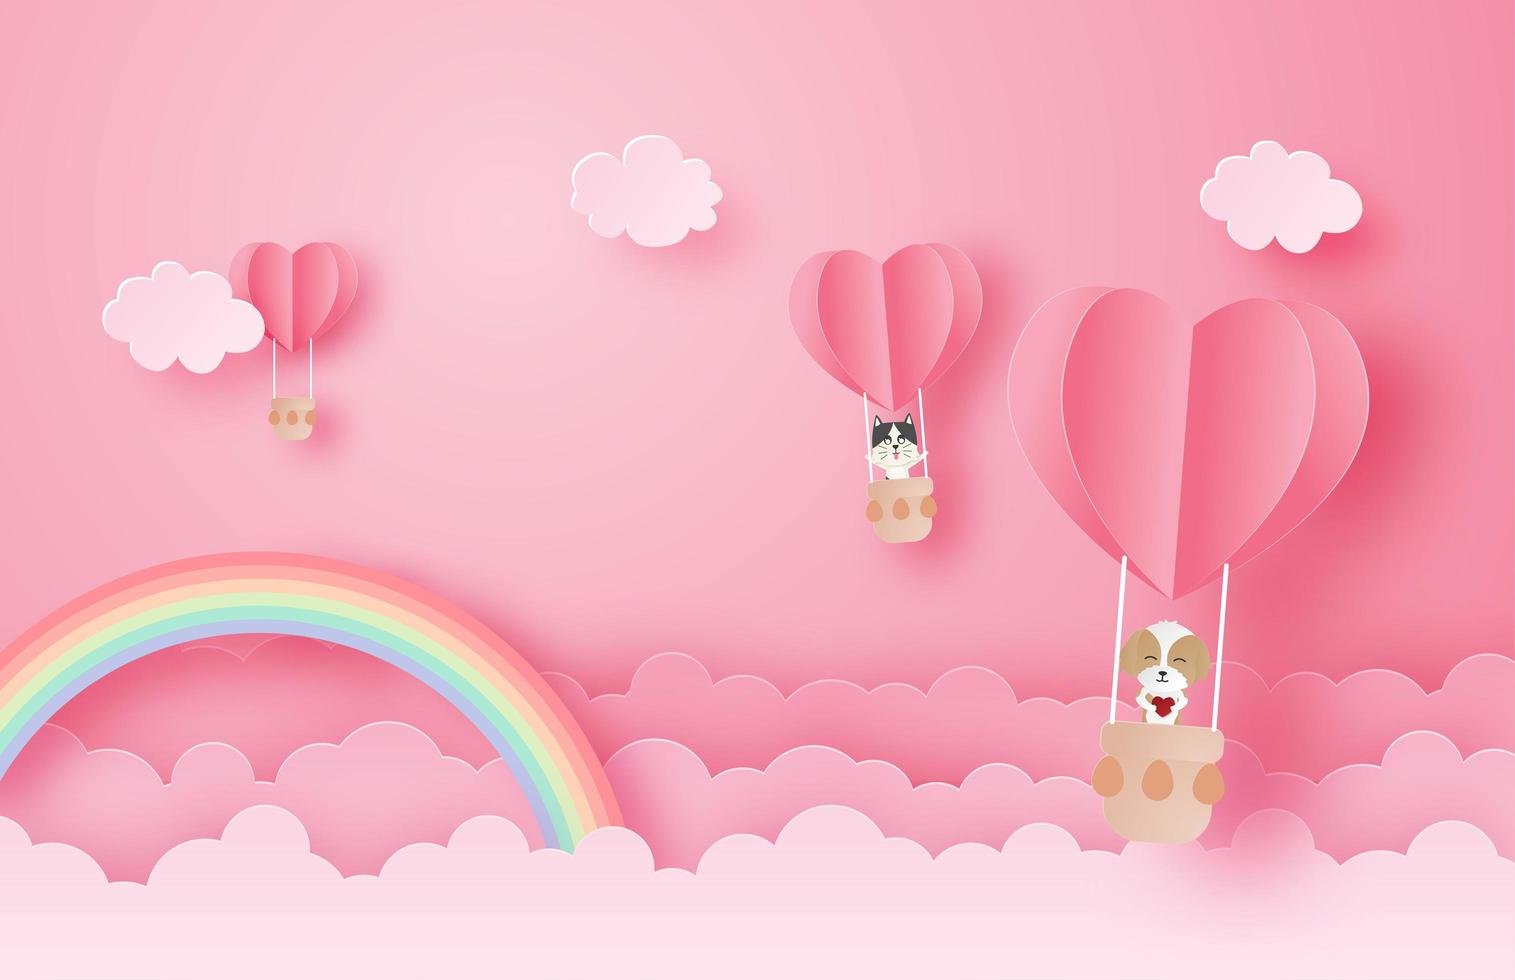 Paper art dog and cat in air balloons in sky vector